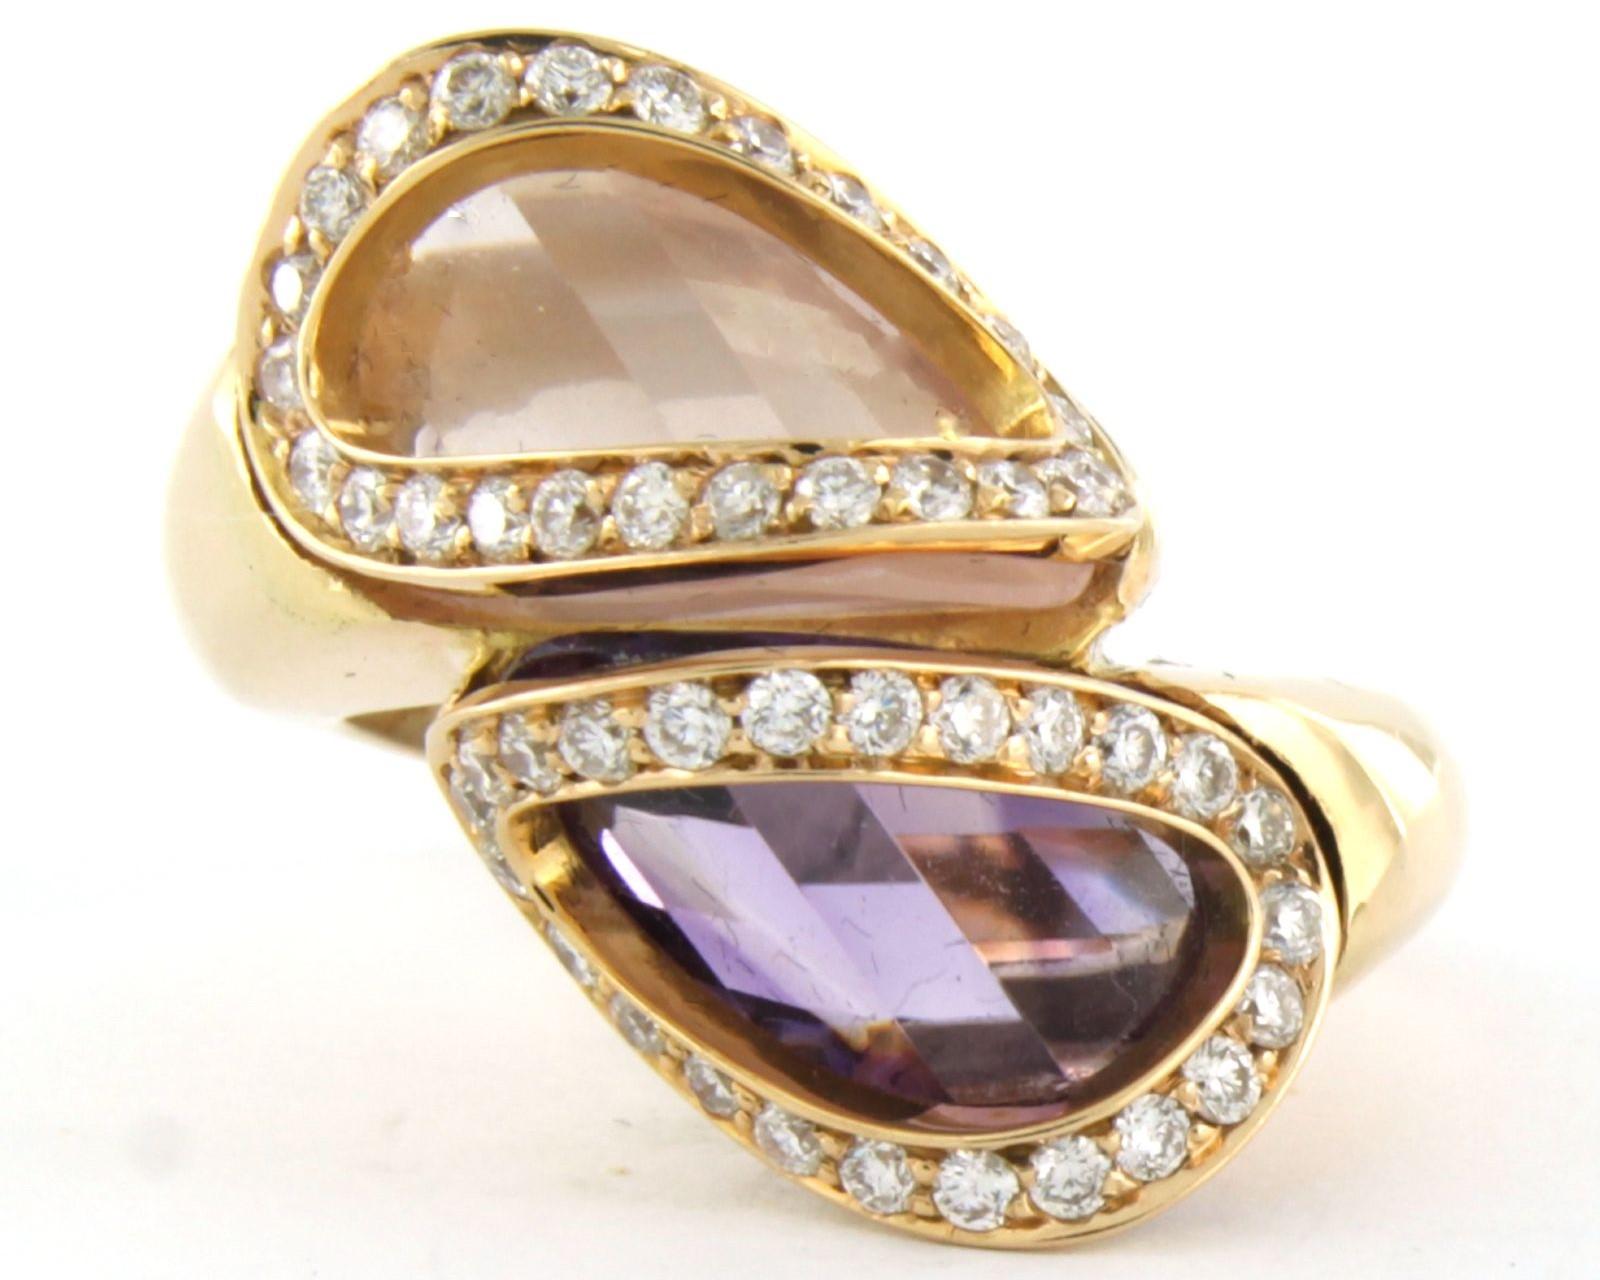 Superoro - 18k rose gold ring set with amethyst and pink quartz, and brilliant cut diamond 0.50 ct G/H-VS/SI - ring size U.S. 6.5 - EU. 17(53)

detailed description:

the top of the ring is 2.0 cm wide

weight: 12.2 gr

ring size U.S. 6.5 - EU.